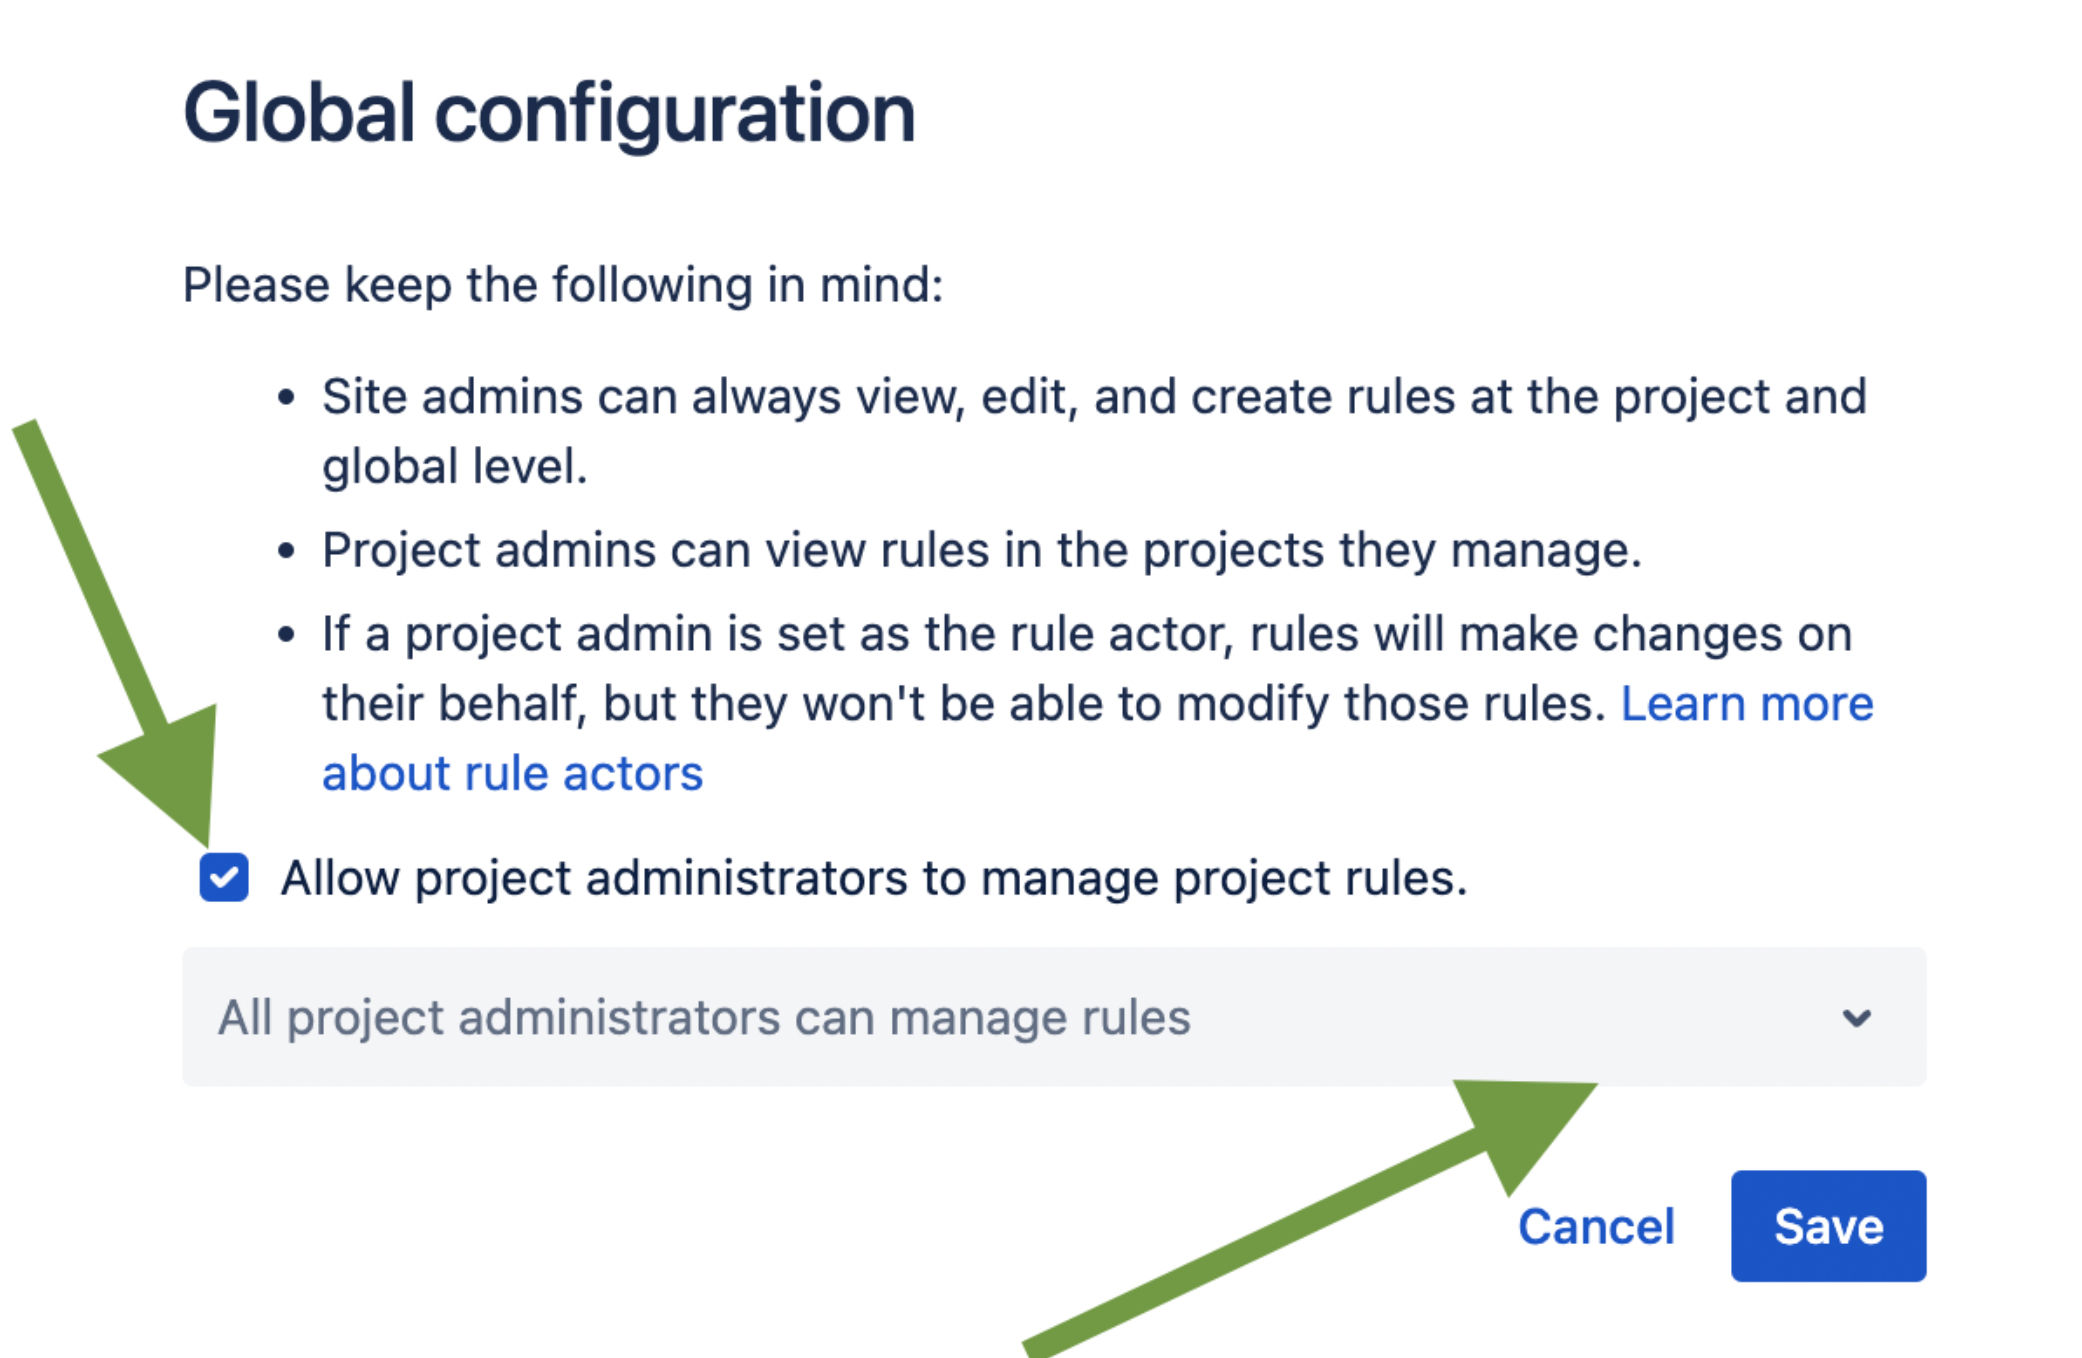 Global configuration setting Allow project administrators to manage project rules